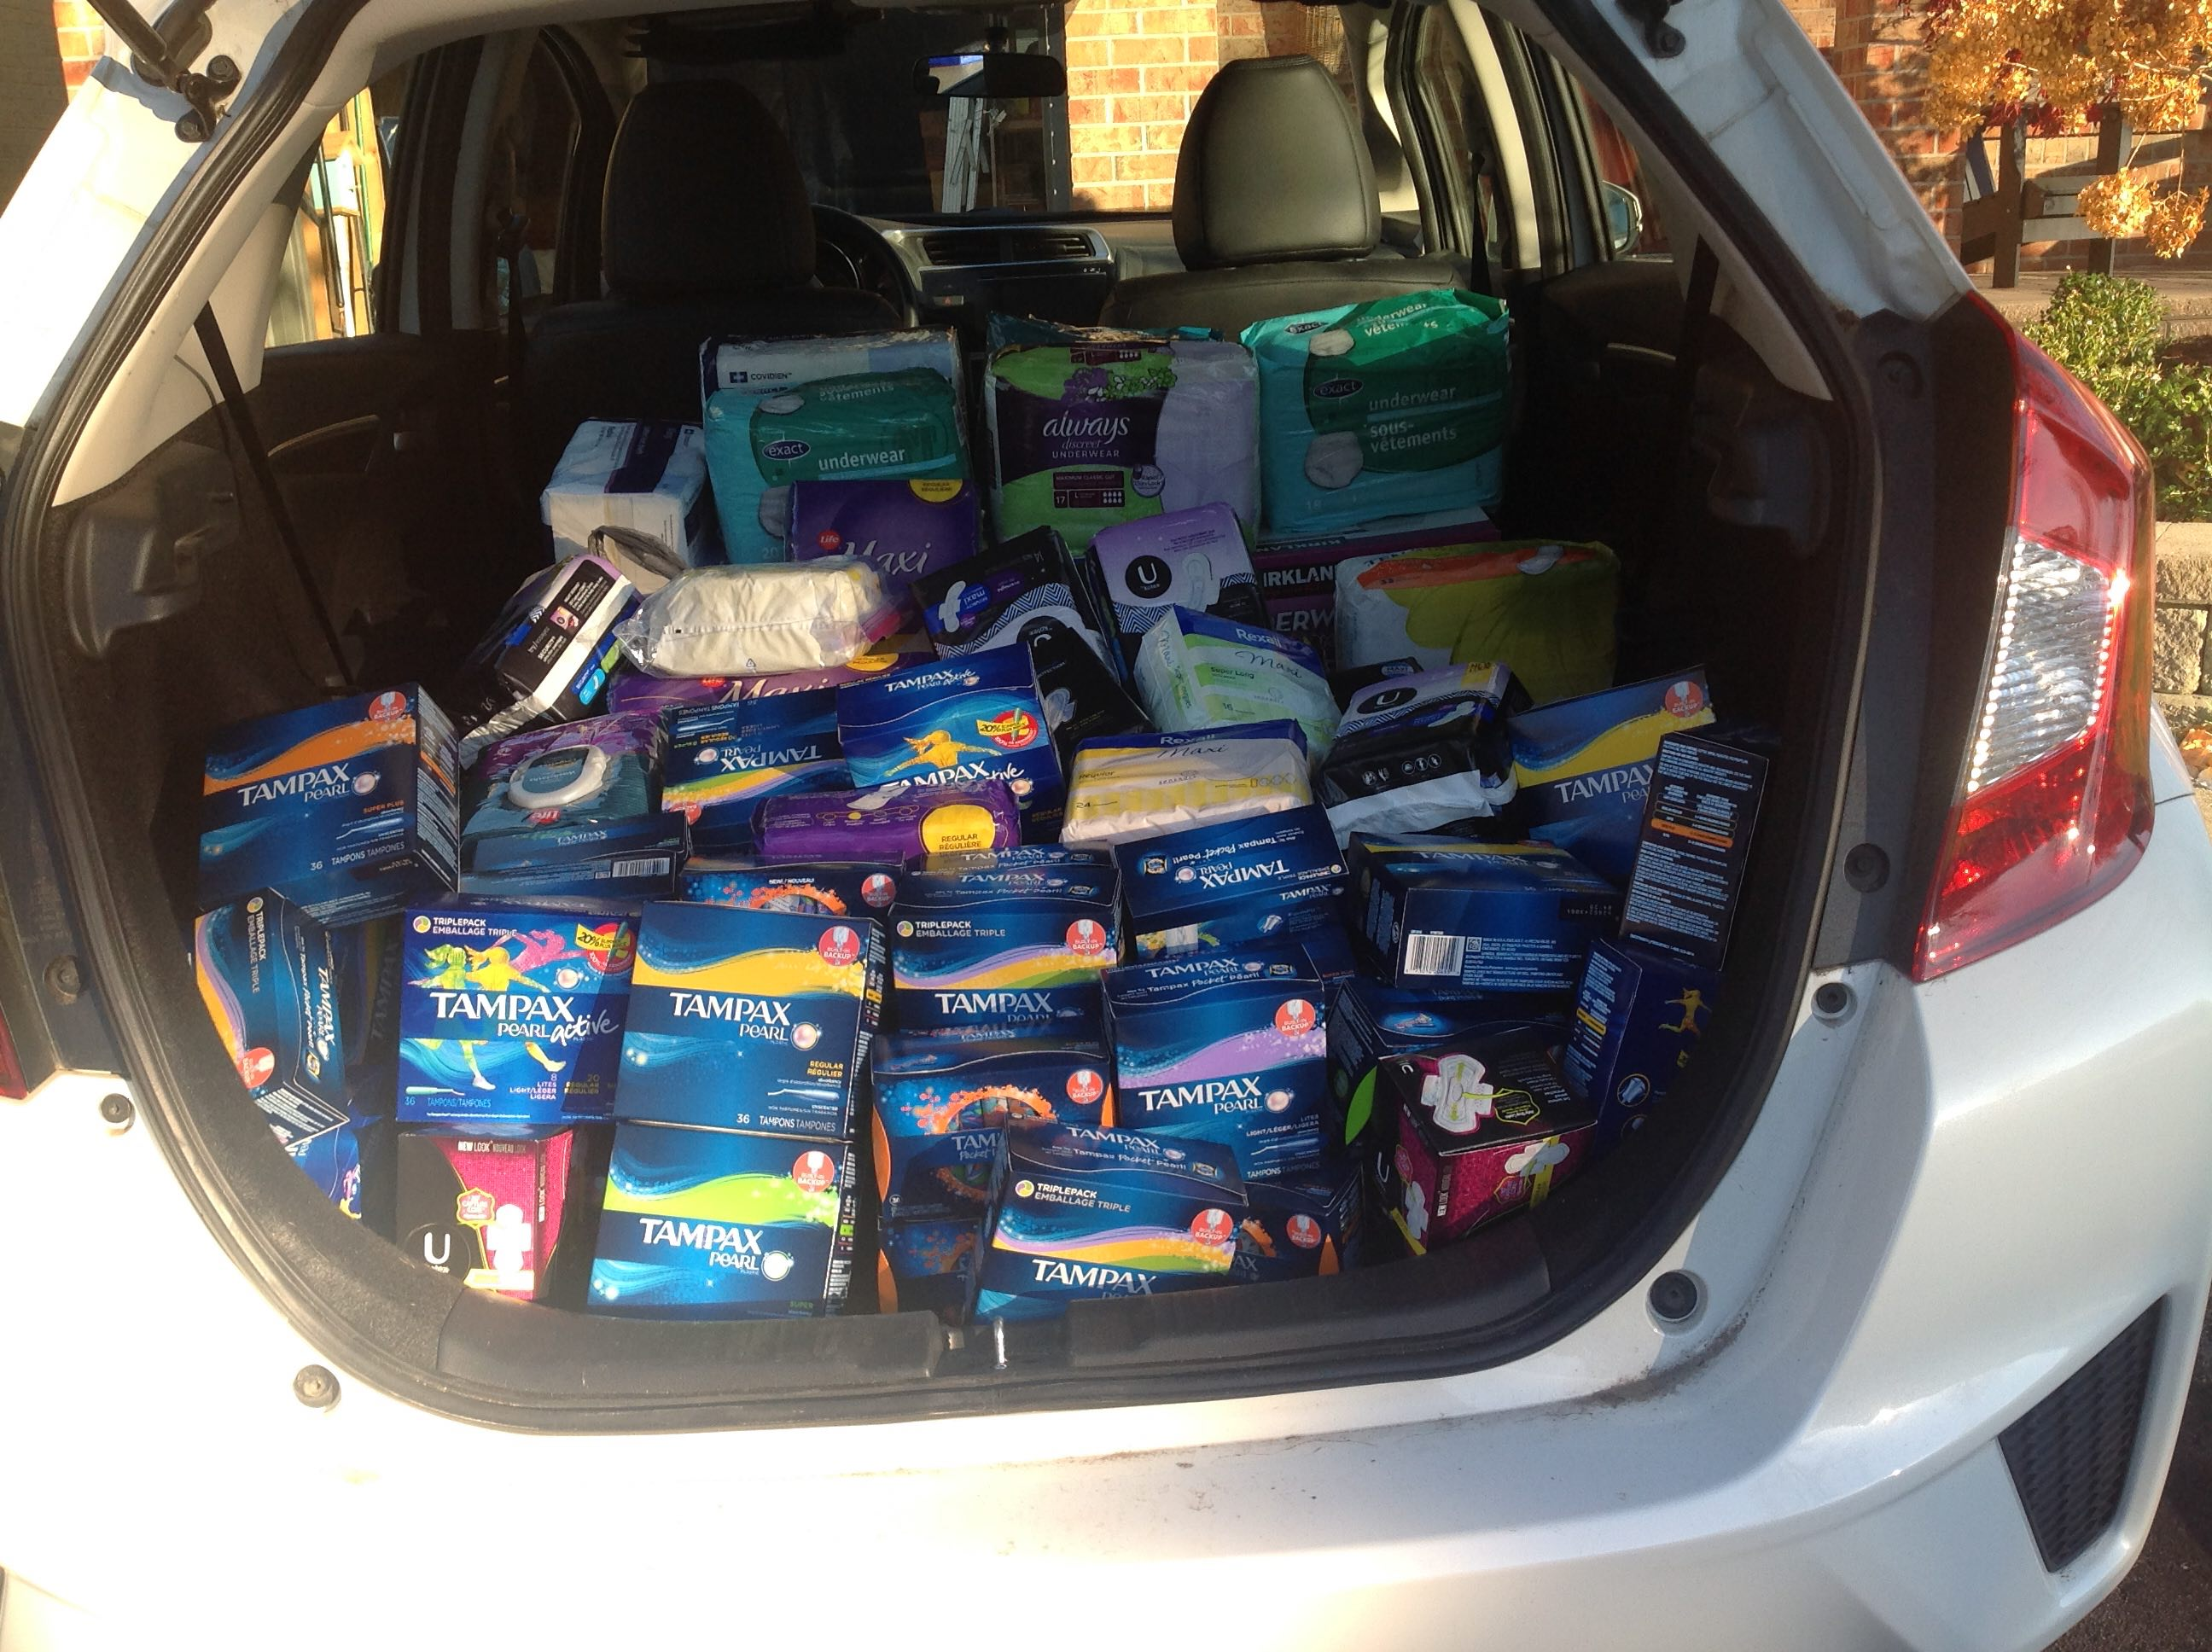 When people heard unmentionables mentioned, they responded resoundingly and filled a car trunk with feminine hygiene and adult incontinence products.Photo: Linda Shakespeare